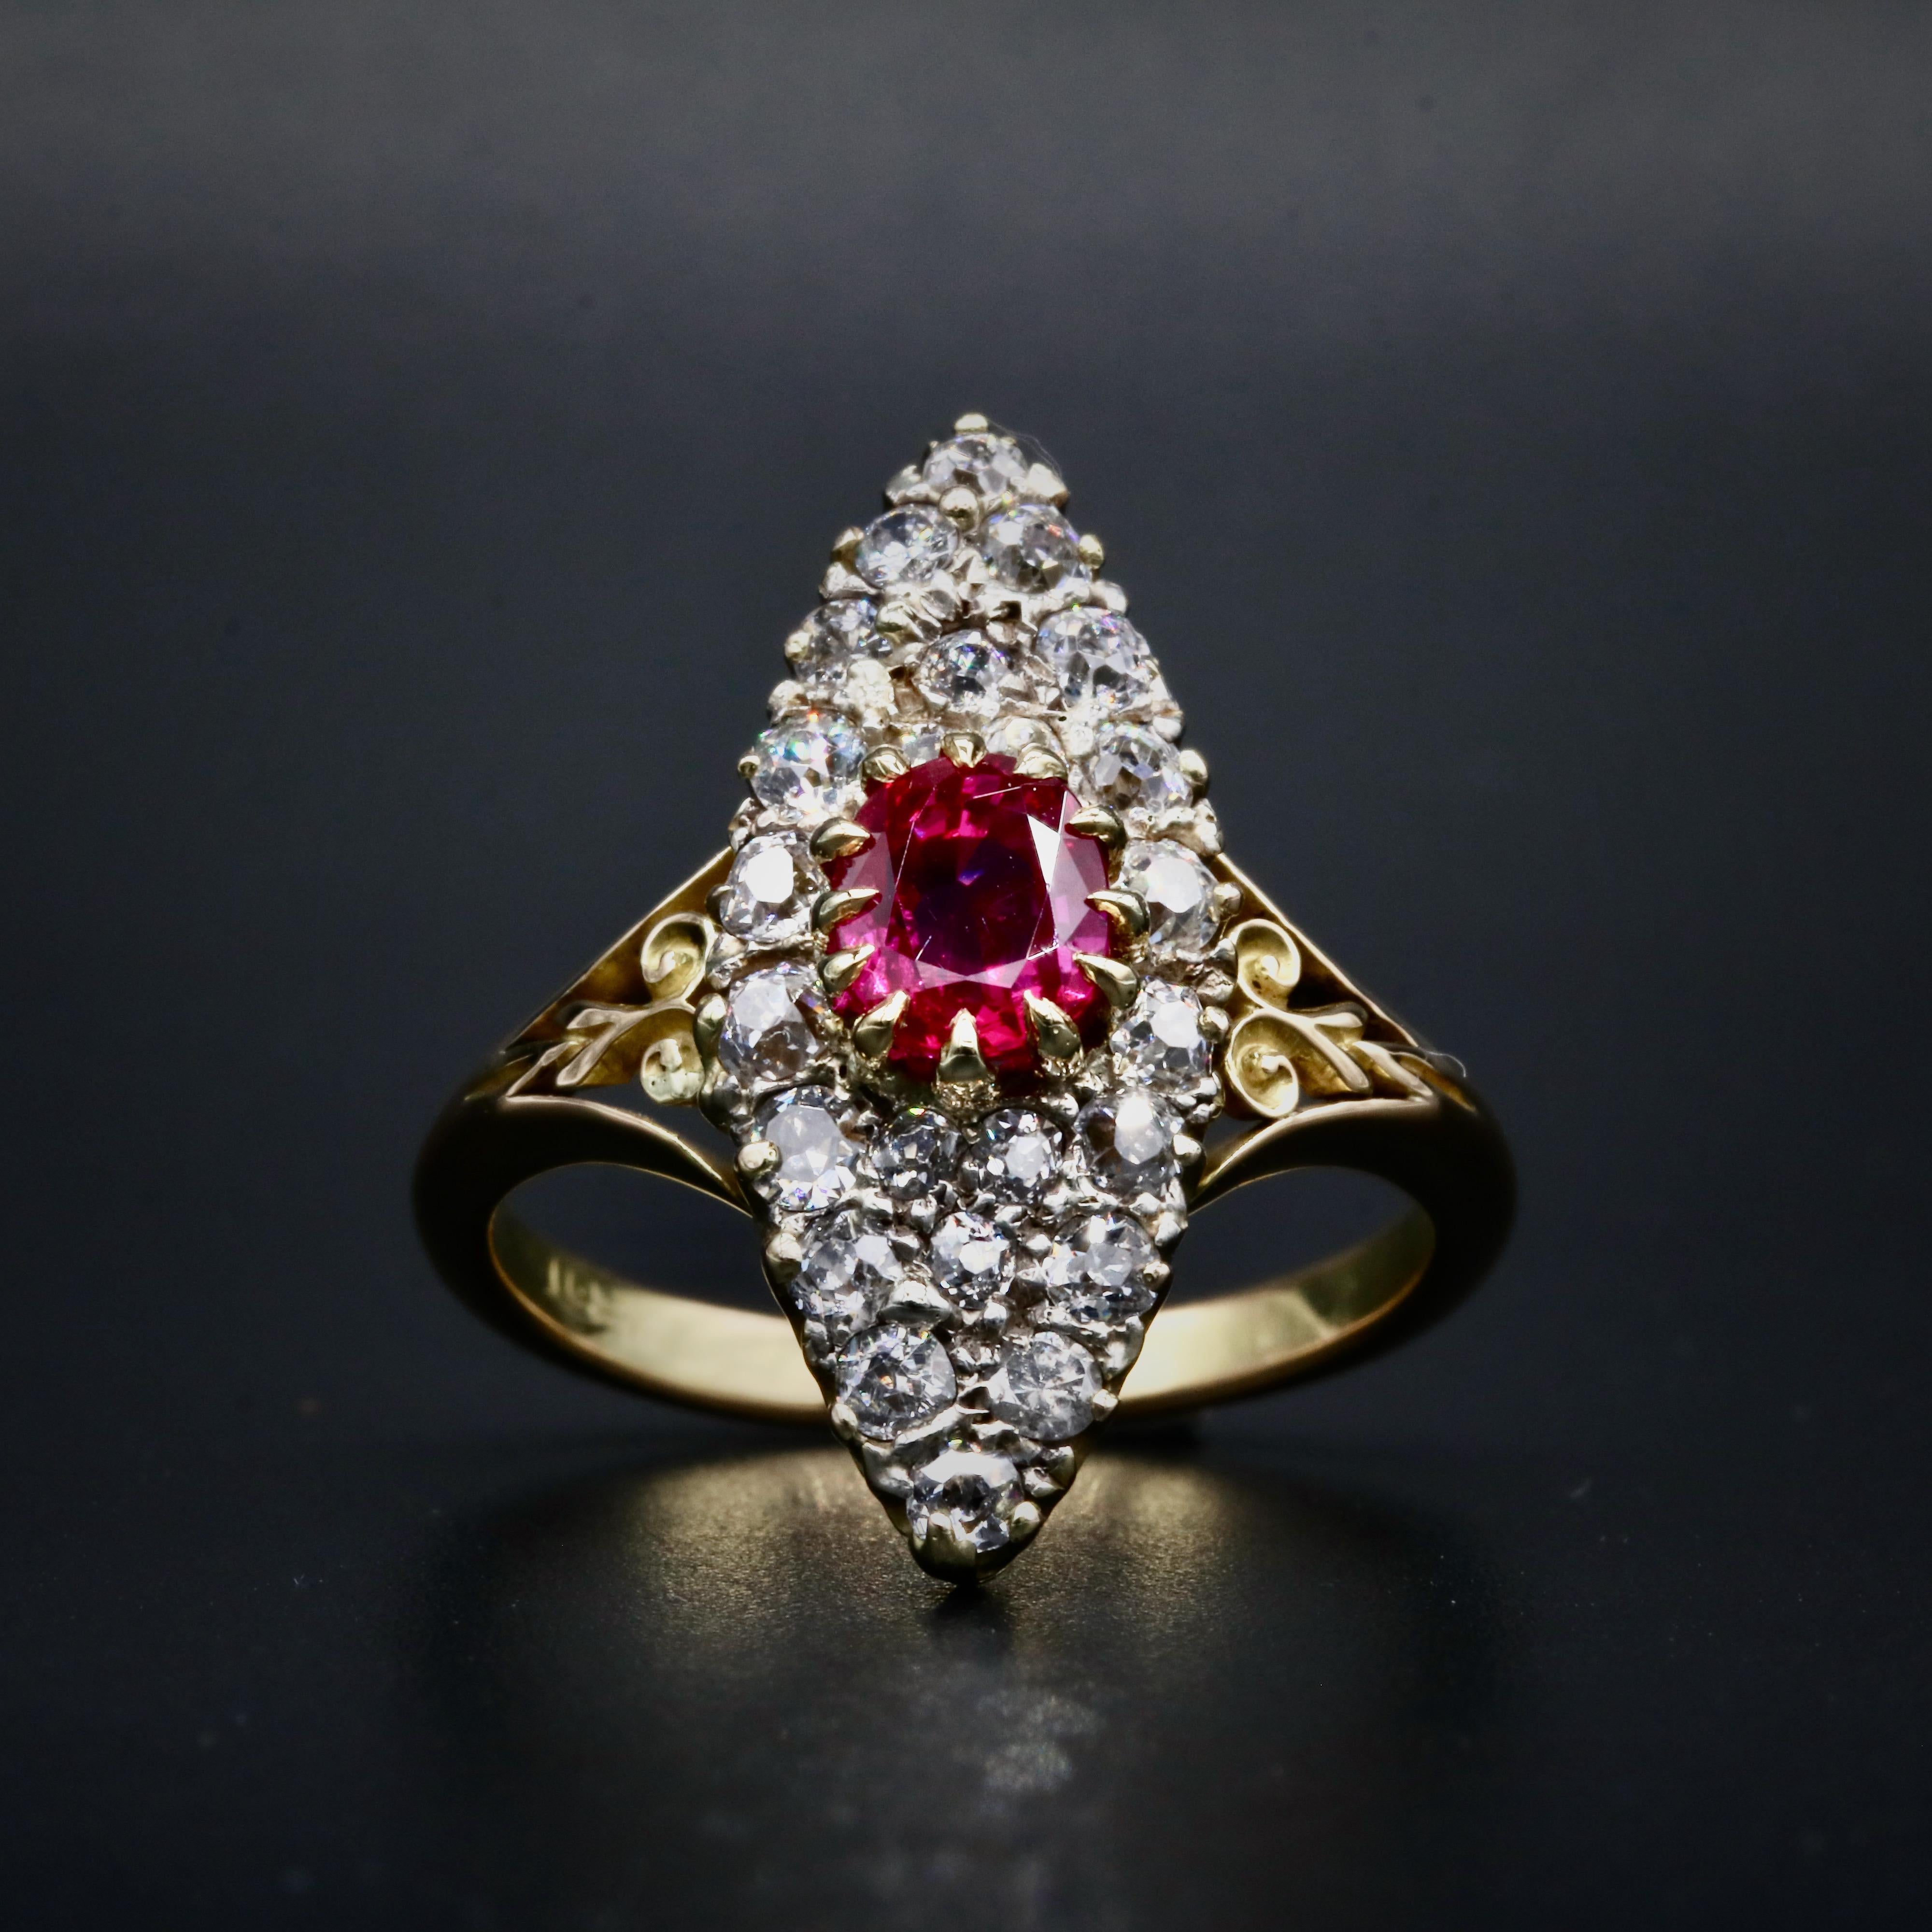 Old European Cut Antique Victorian 18K Yellow Gold 2.1tgw Ruby and Diamond Marquise Ring For Sale